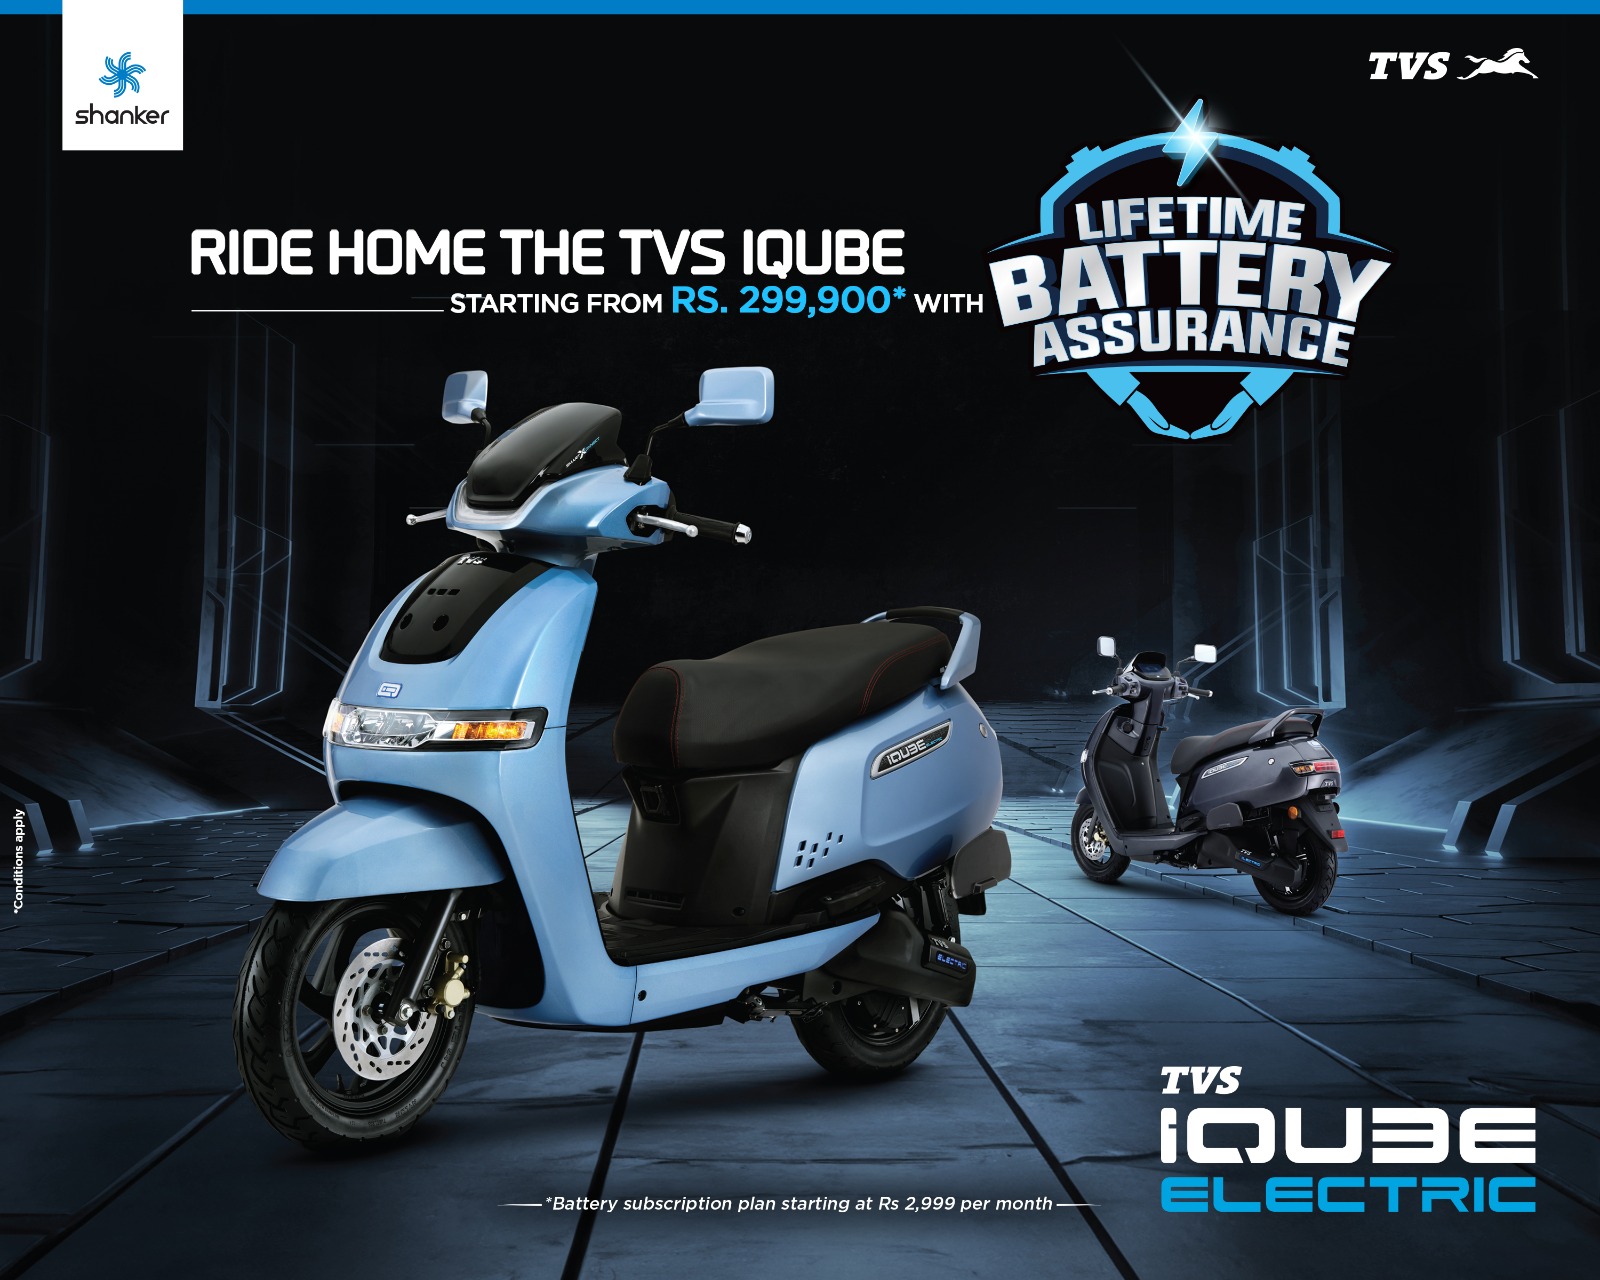 Get TVS iQube electric scooter with lifetime battery assurance from Rs 2,99,900